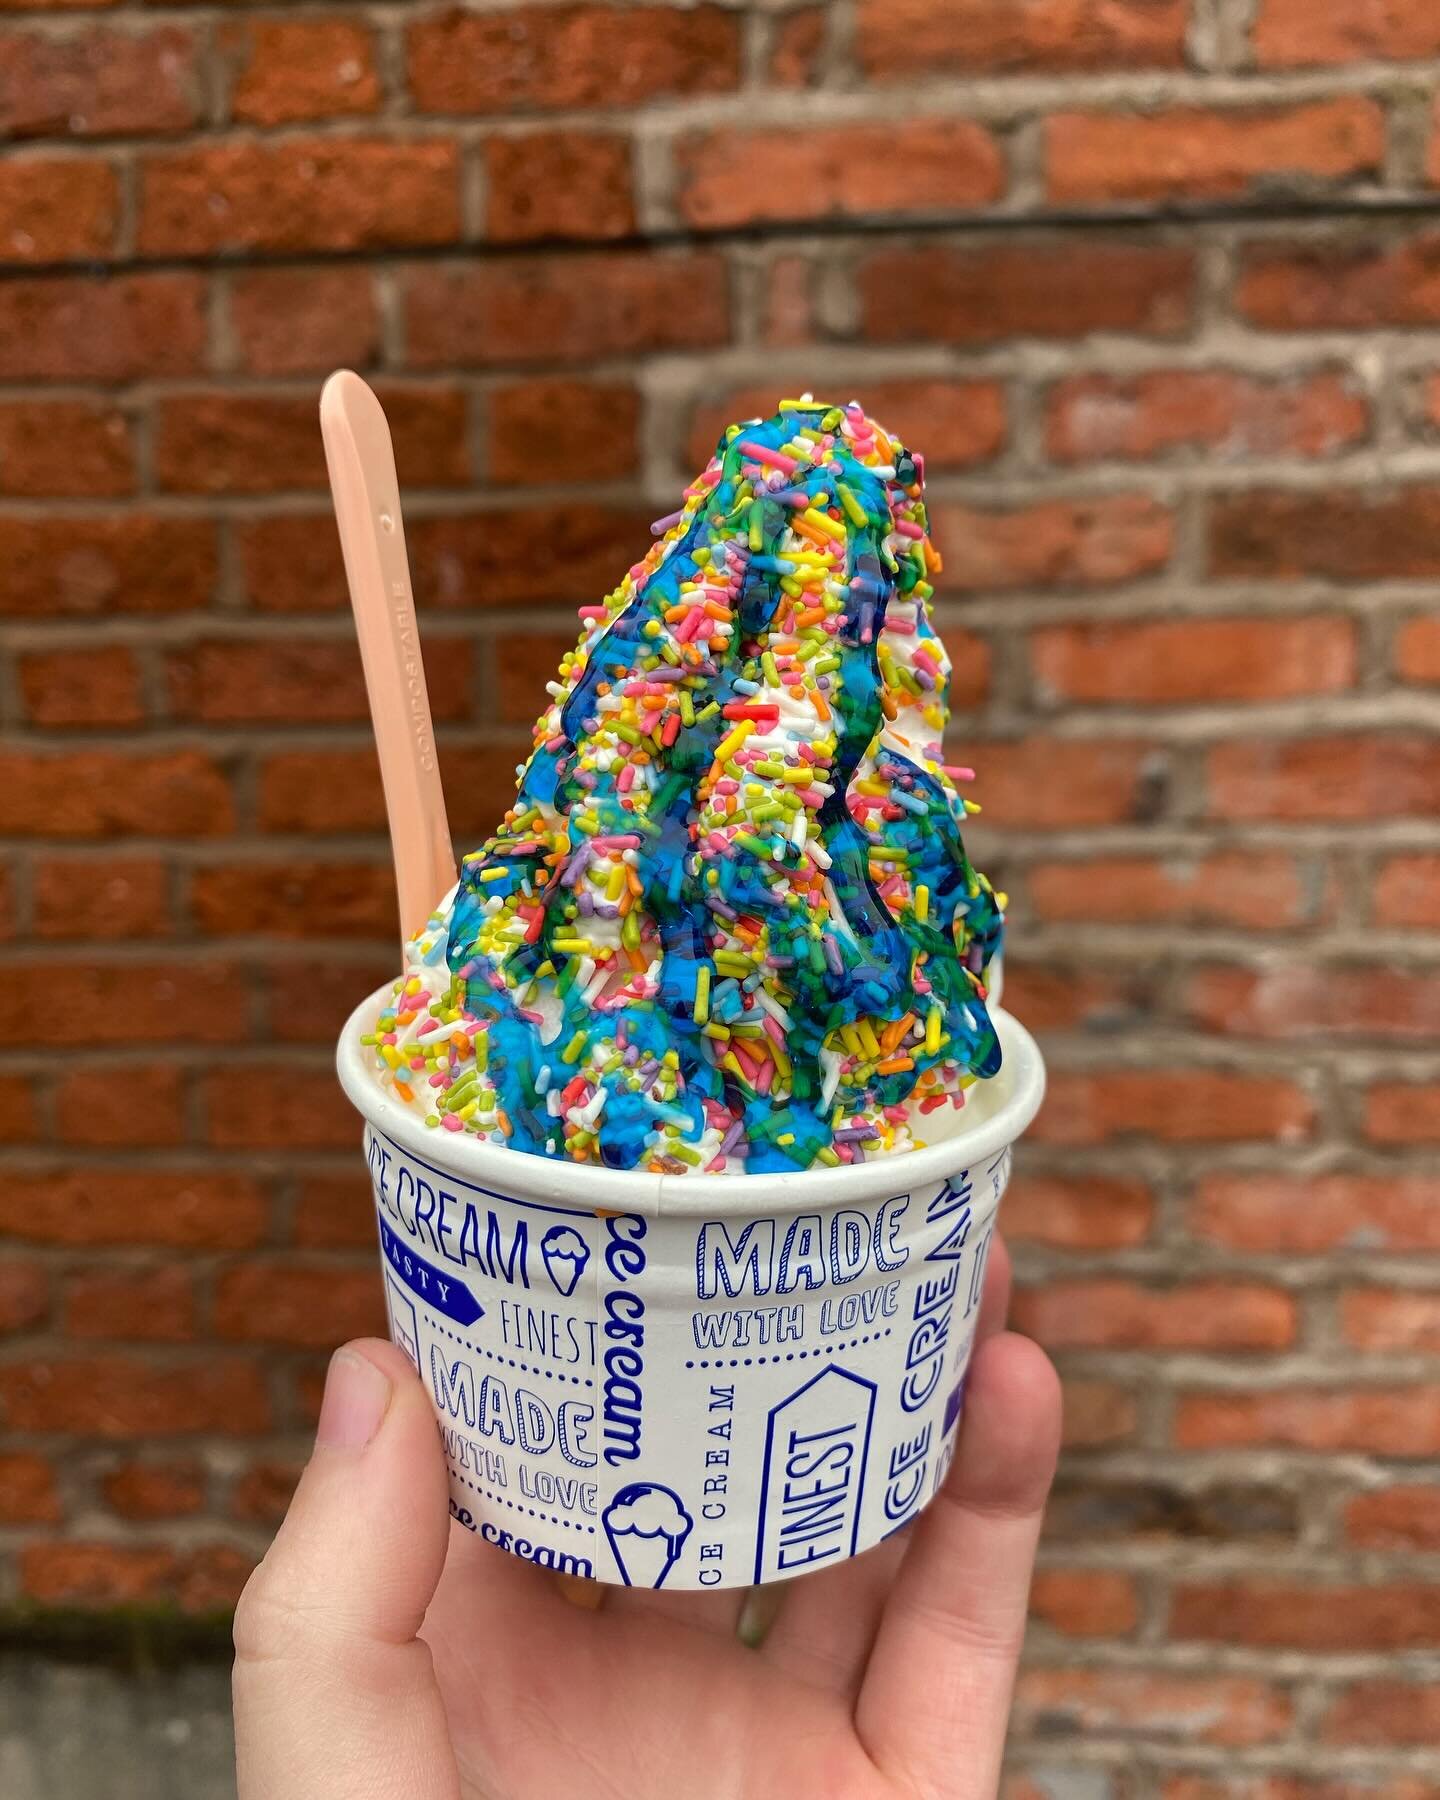 COLOUR OVERLOAD!!!
Everyone is a kid at heart, so why not treat your inner child with sprinkles and bubblegum sauce

#lewisbrosicecream #icecream #icecreamlover #flake #icecreamvan #sweet #sweettreats #vanlife #dessert #local #warrington #manchester 